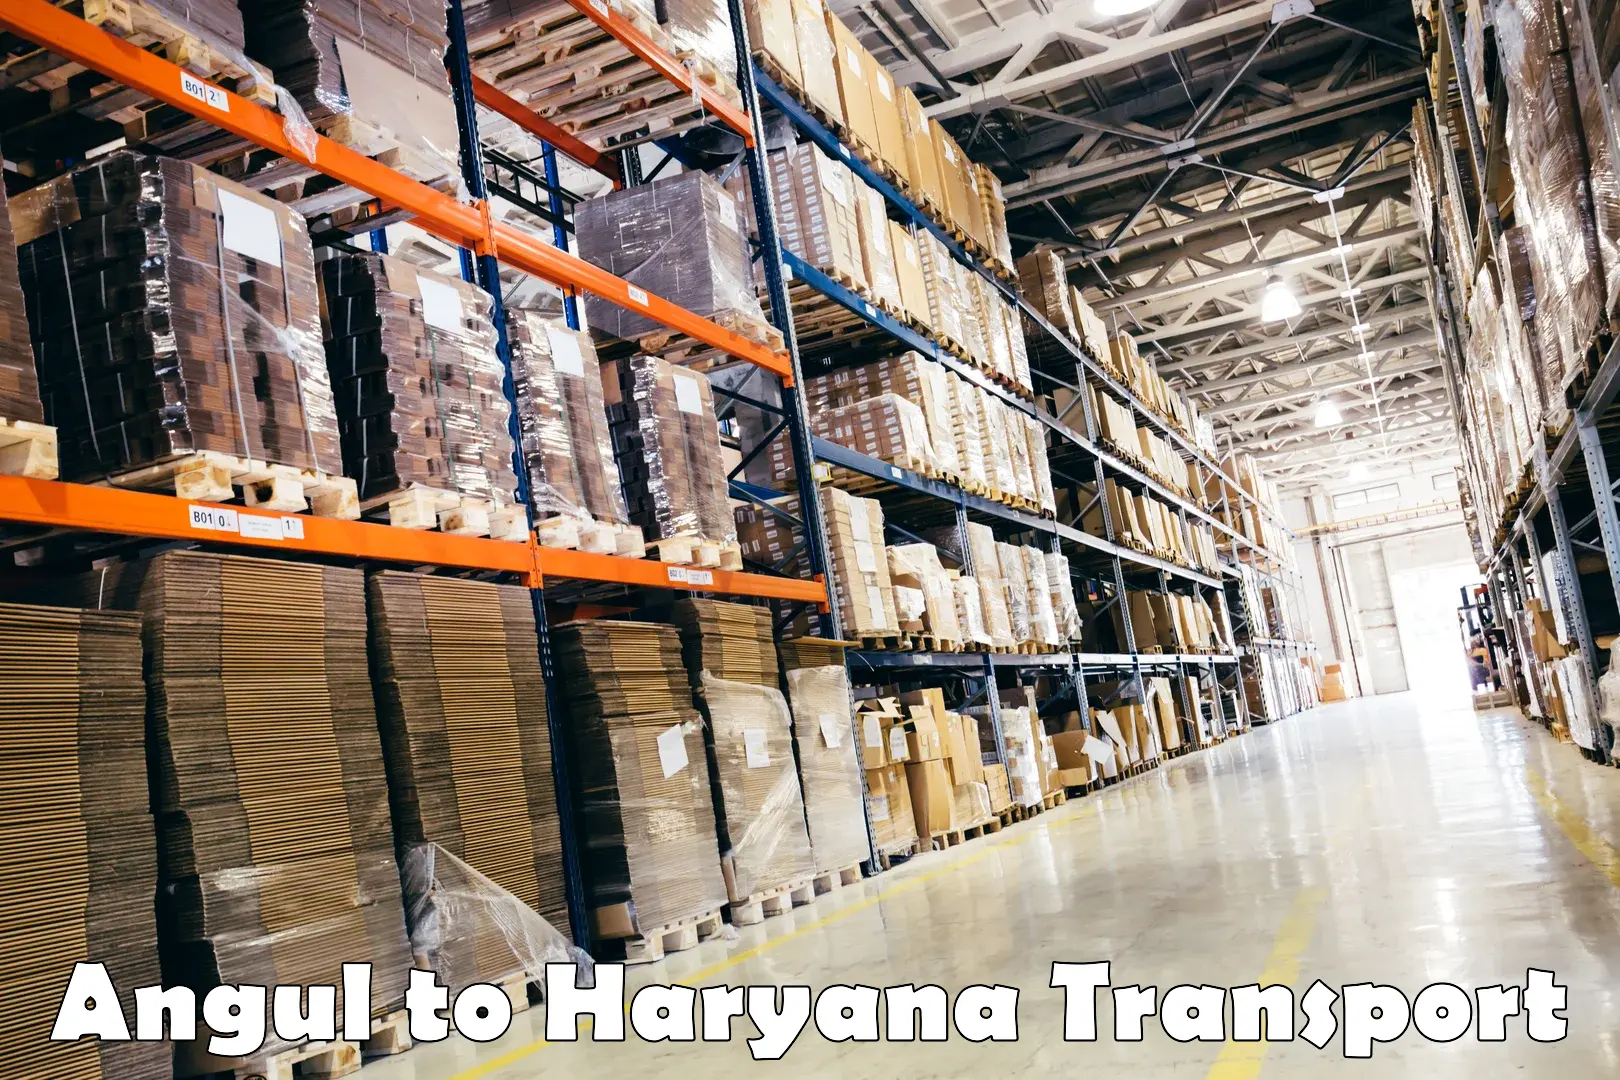 Commercial transport service Angul to Haryana